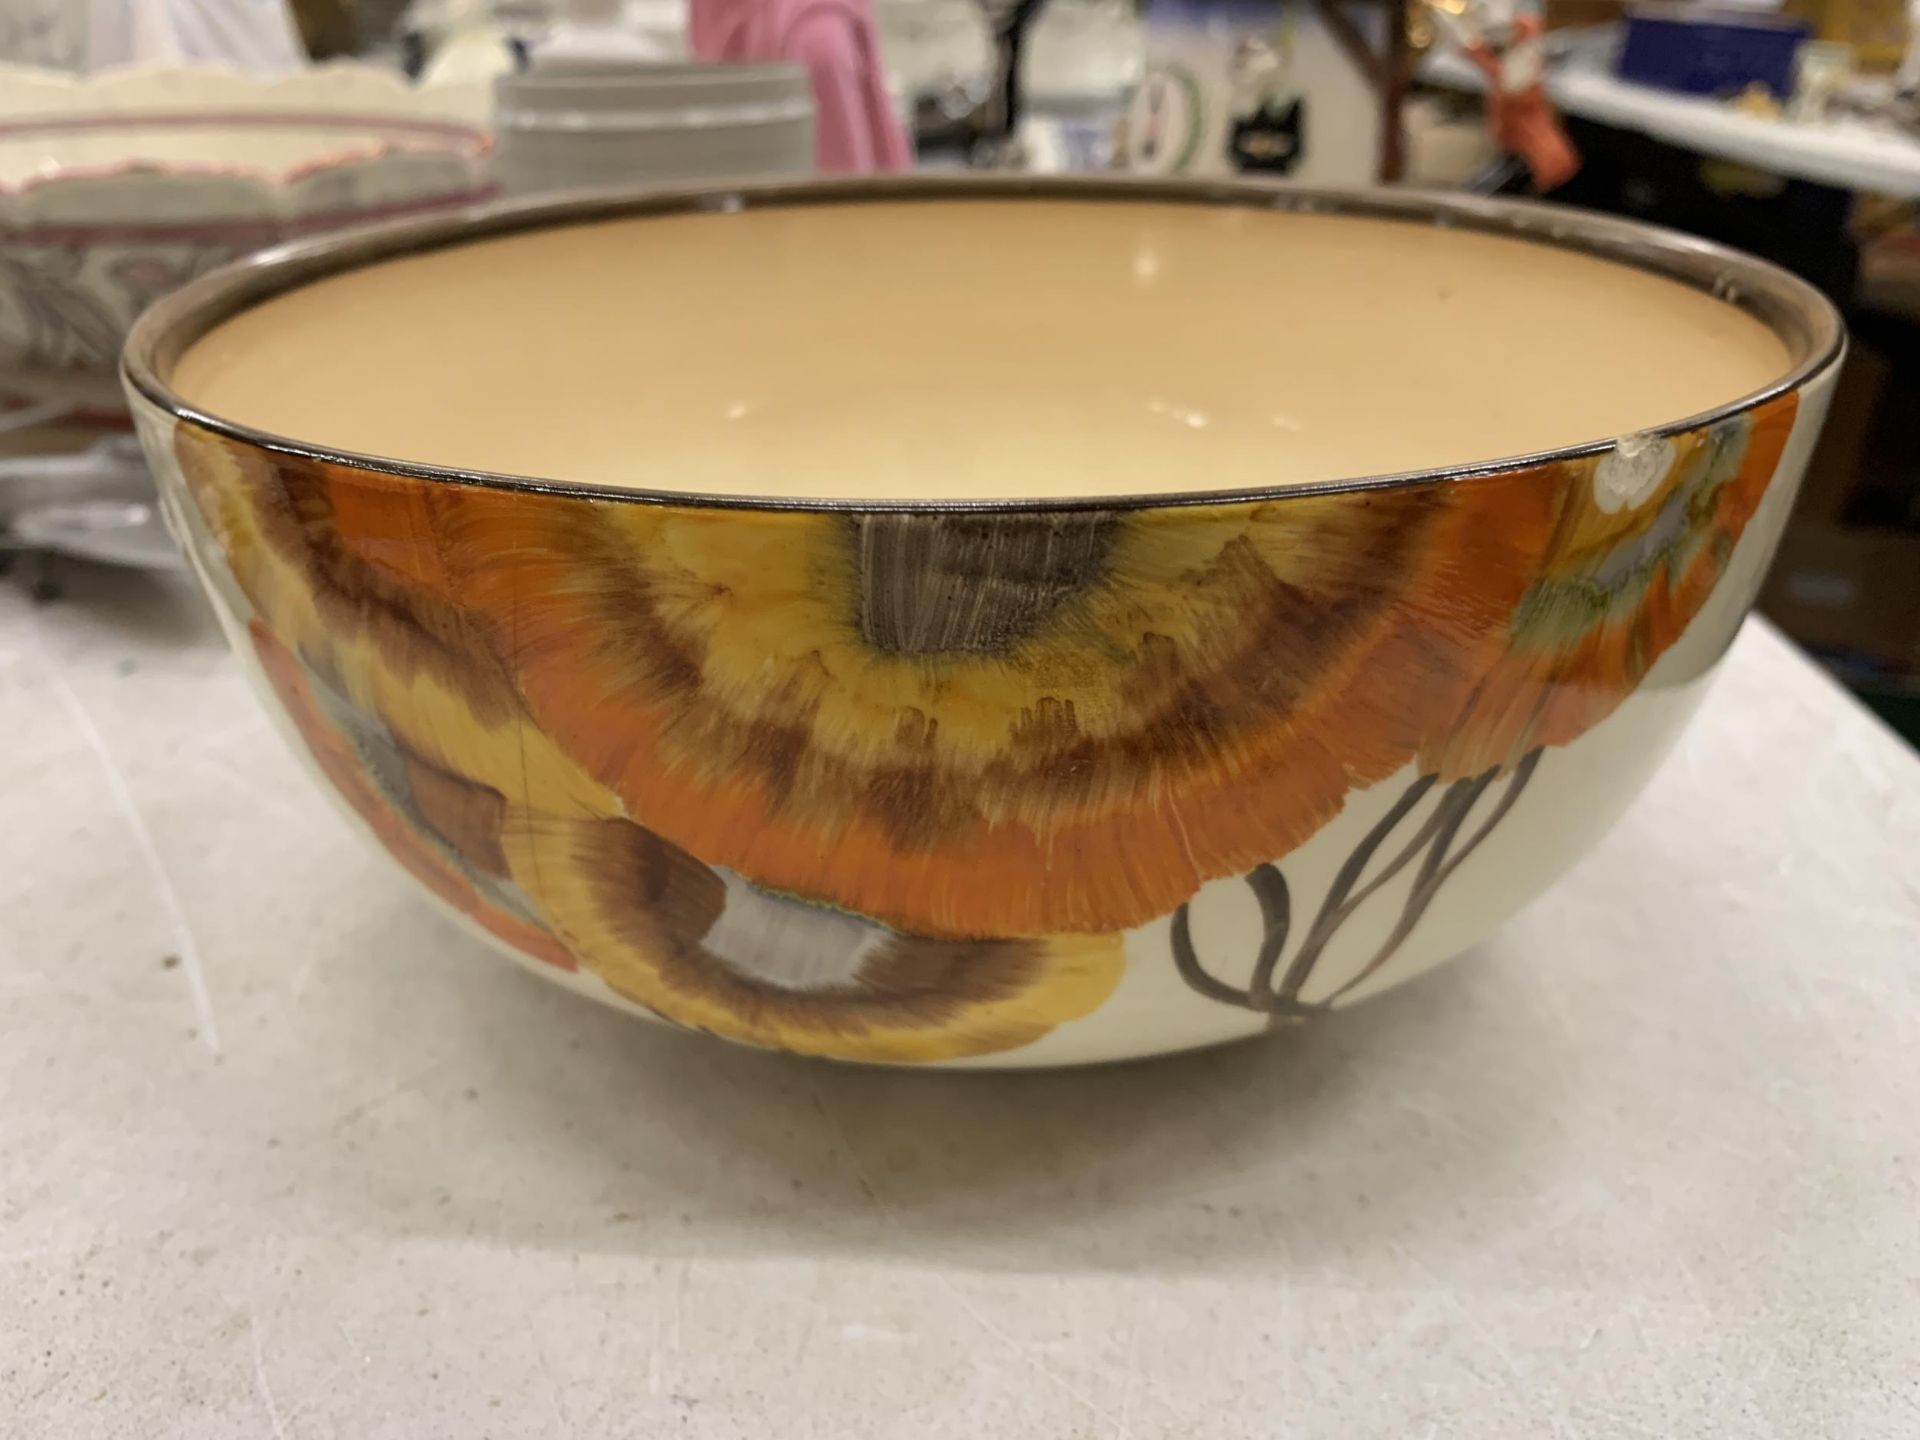 A VINTAGE CLARICE CLIFF BOWL IN THE RHODANTHE PATTERN, DIAMETER 21.5CM - Image 2 of 4